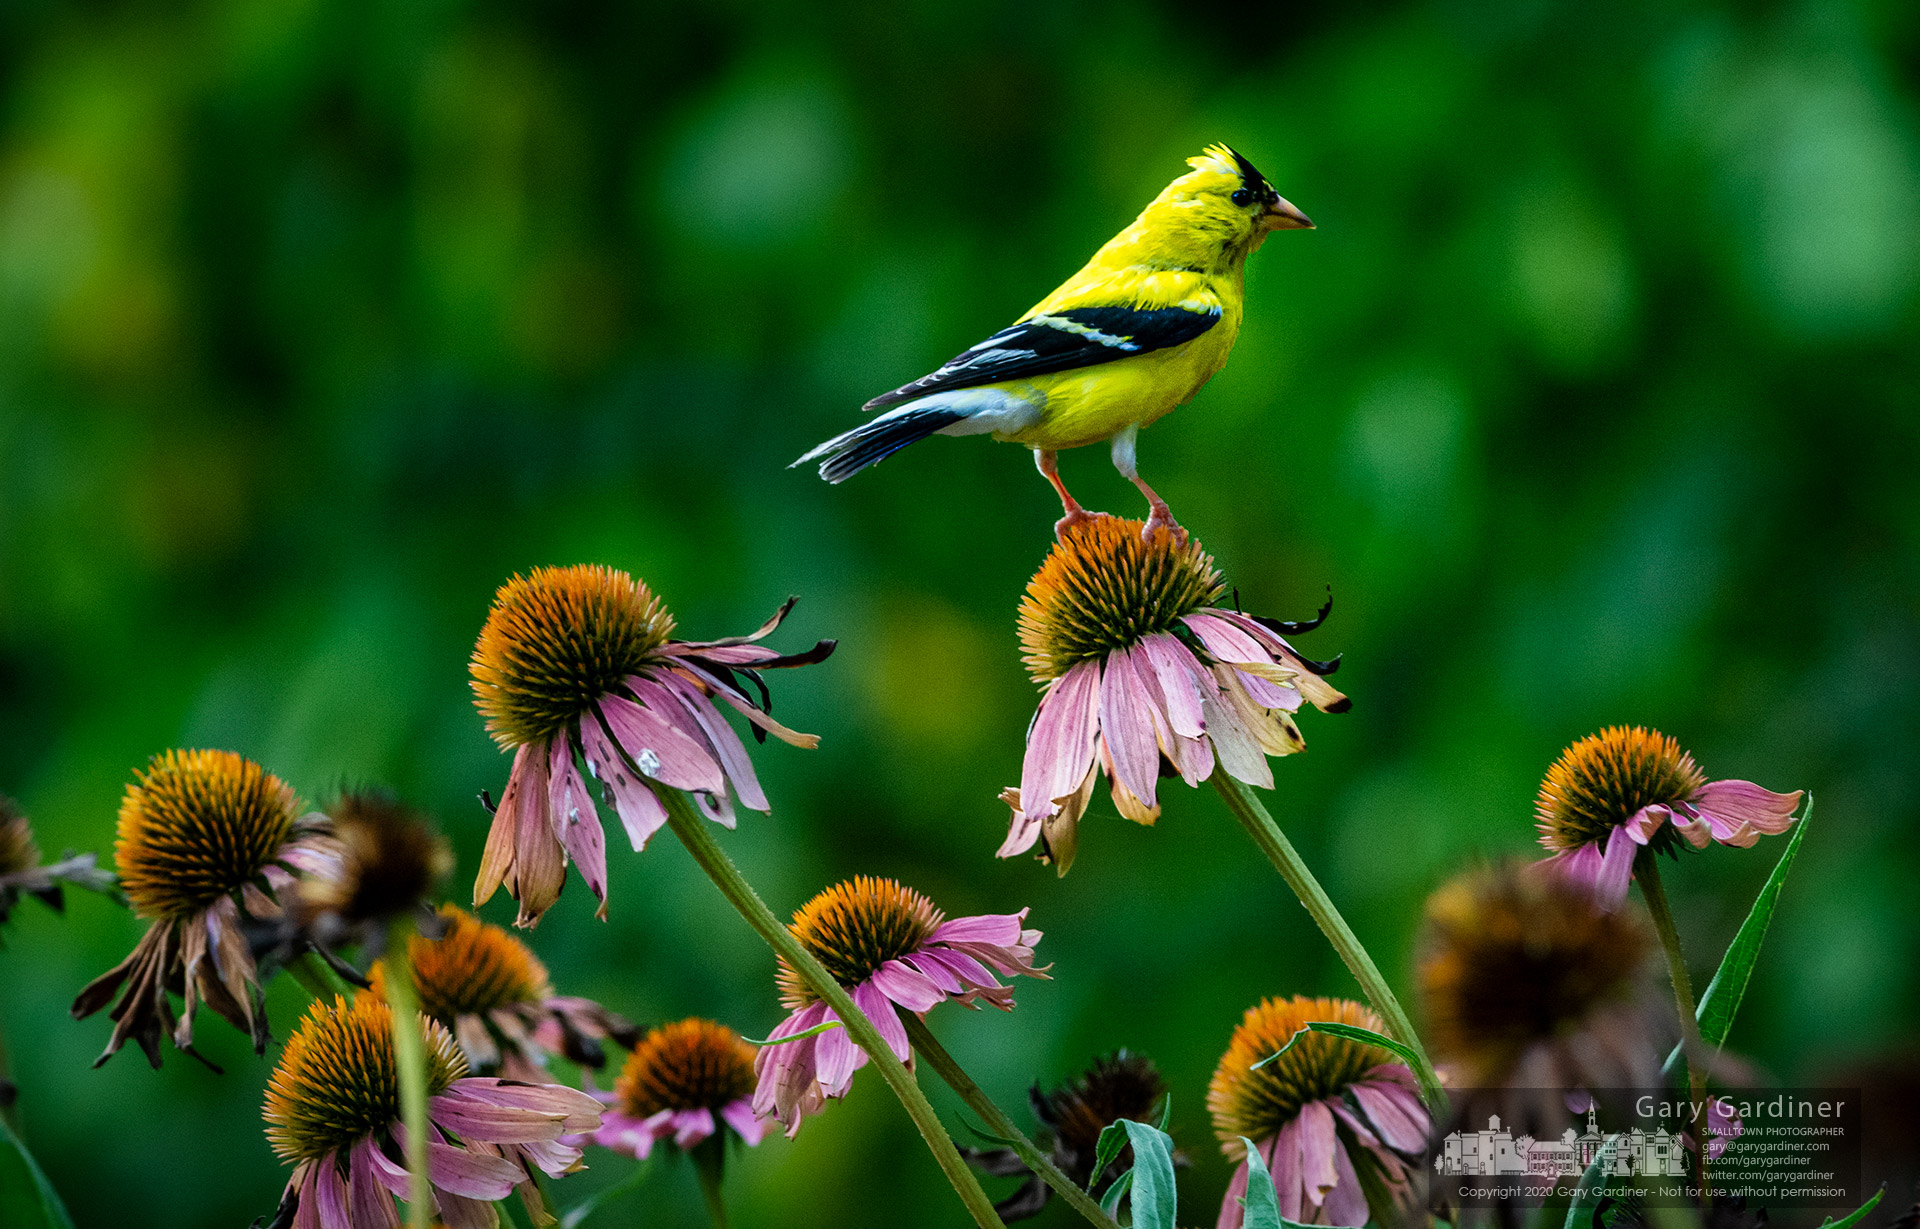 A goldfinch stands atop a coneflower in the garden at Cherrington Park where it's been enjoying a meal of seeds from one of its favorite flowers. My Final Photo for Aug. 22, 2020.